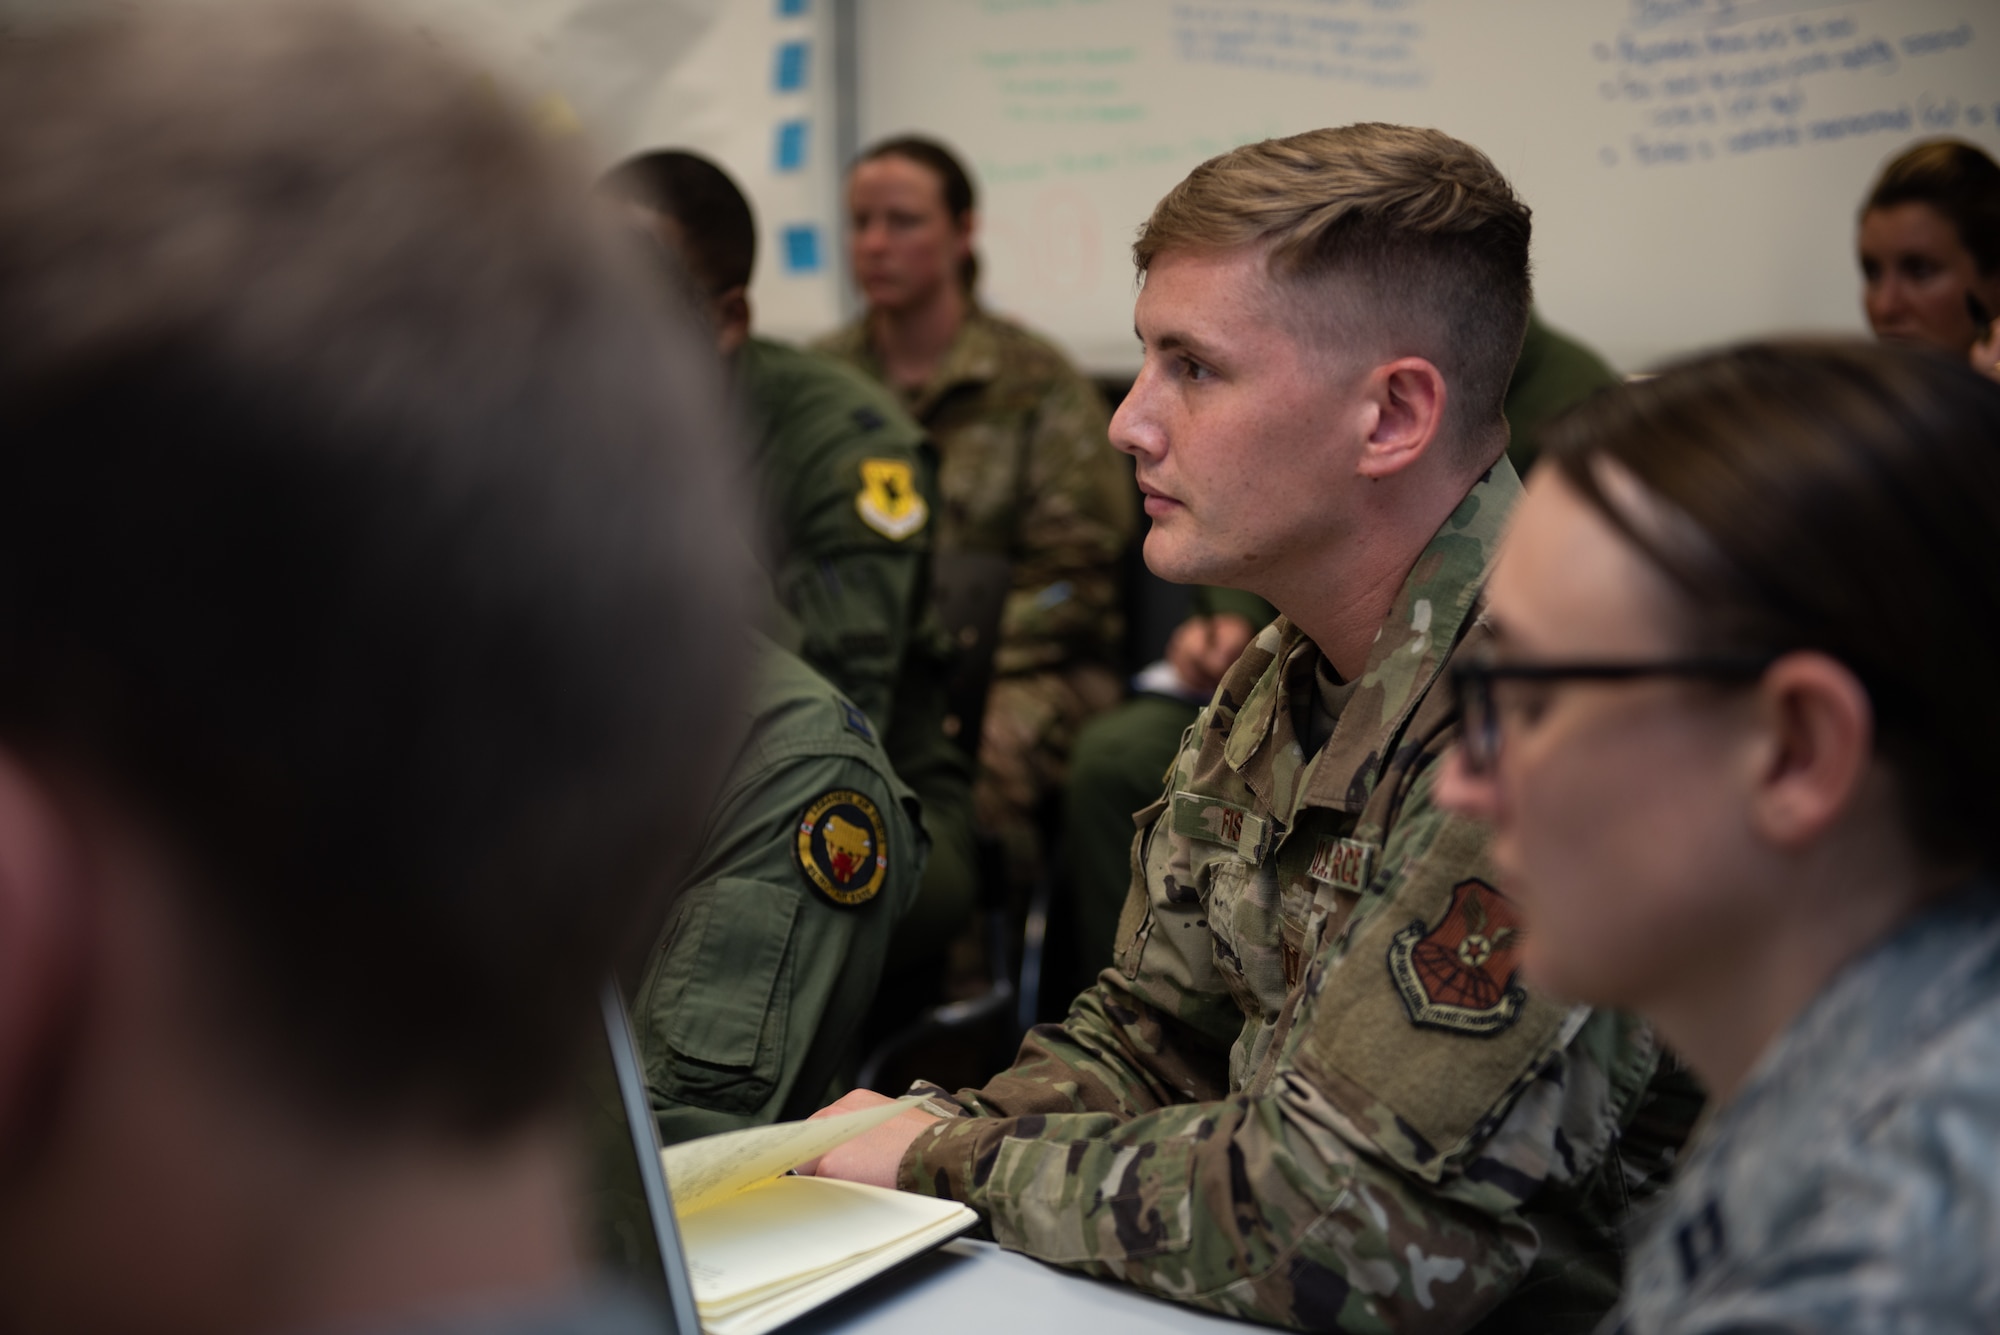 A Squadron Officer School students listen as they recieve initial feedback on their Think Tank elective presentation, May 31, 2019, Maxwell Air Force Base, Alabama. The students were given the challenge to figure out how Artificial Intelligence could be used to solve Air Force issues and better processes.